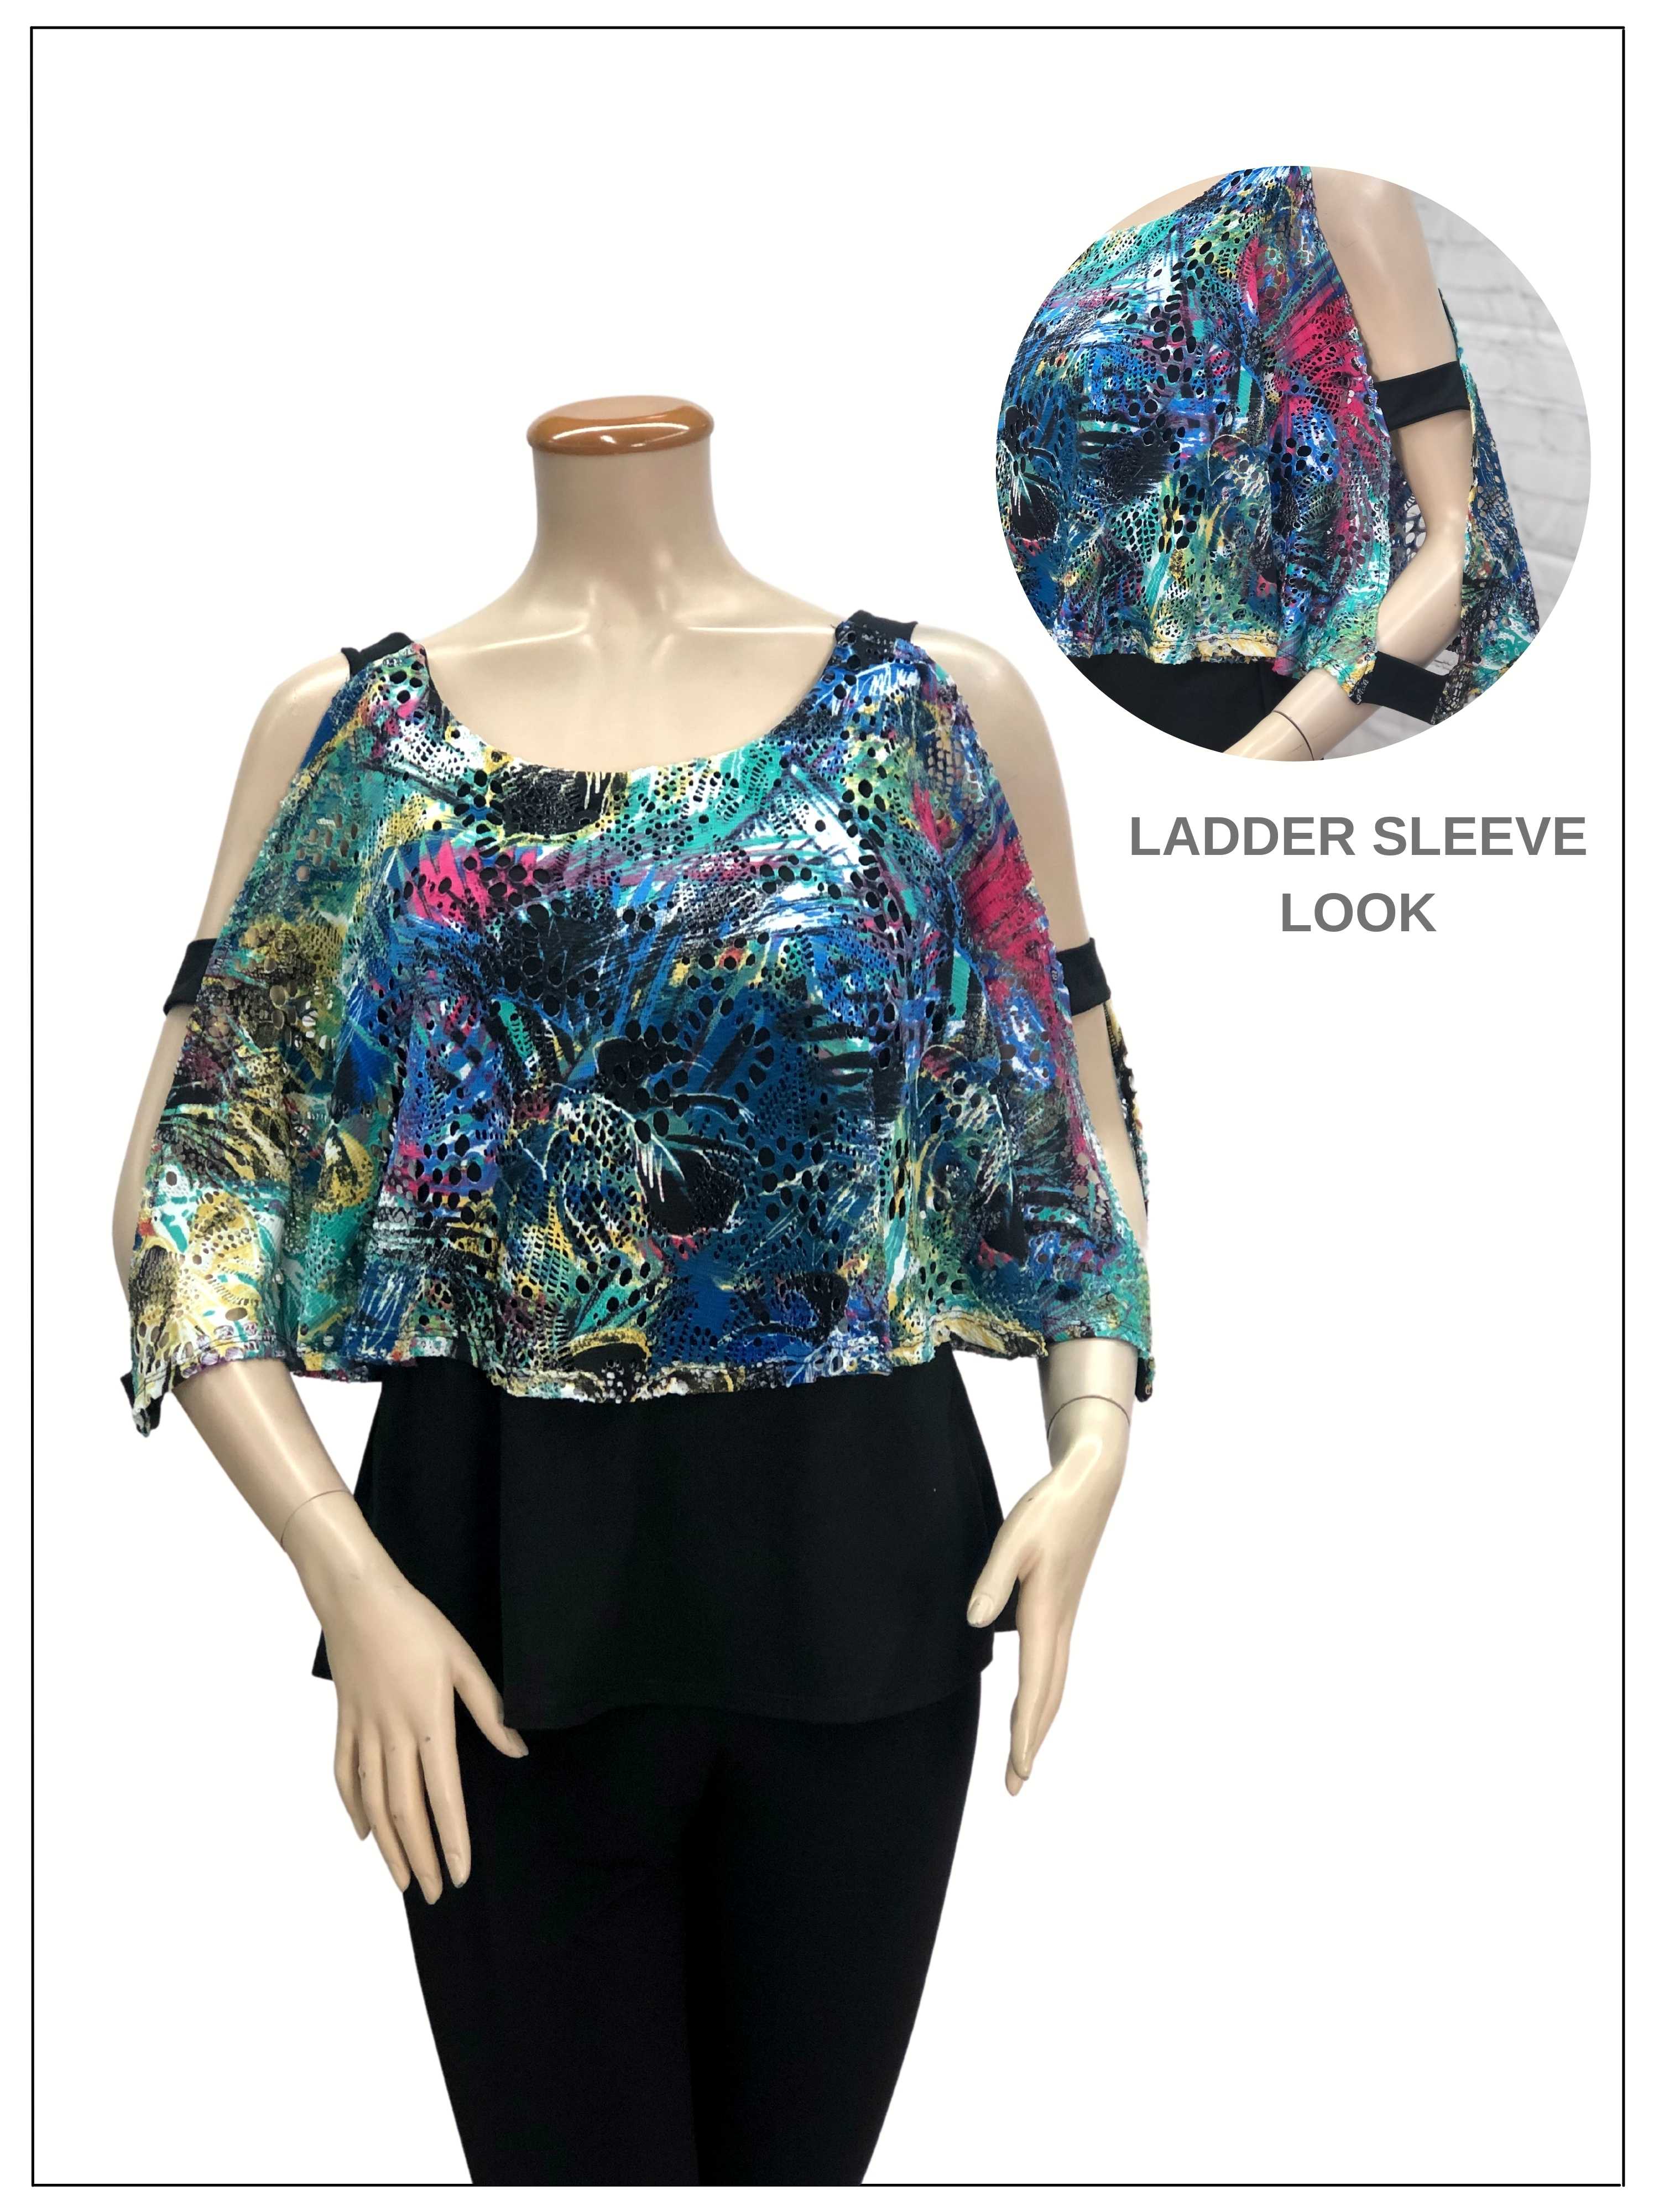 FASHQUE - Elegant Drape Top with Strappy Sleeve - T614